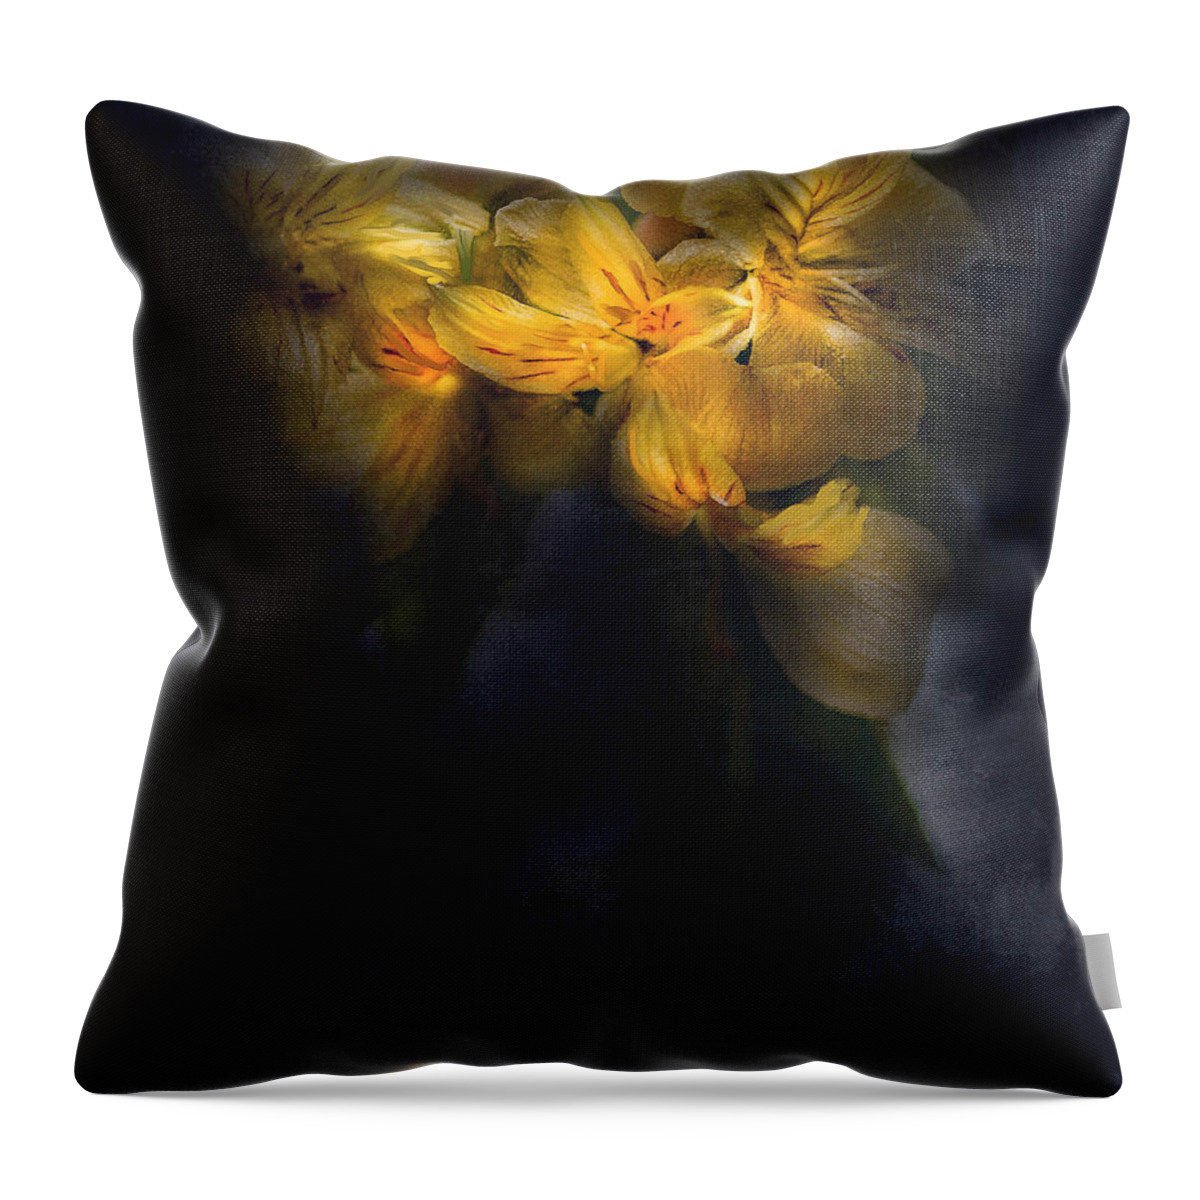 Yellow Flower Throw Pillow featuring the digital art Yellow Flowers Painted On Black by Cordia Murphy